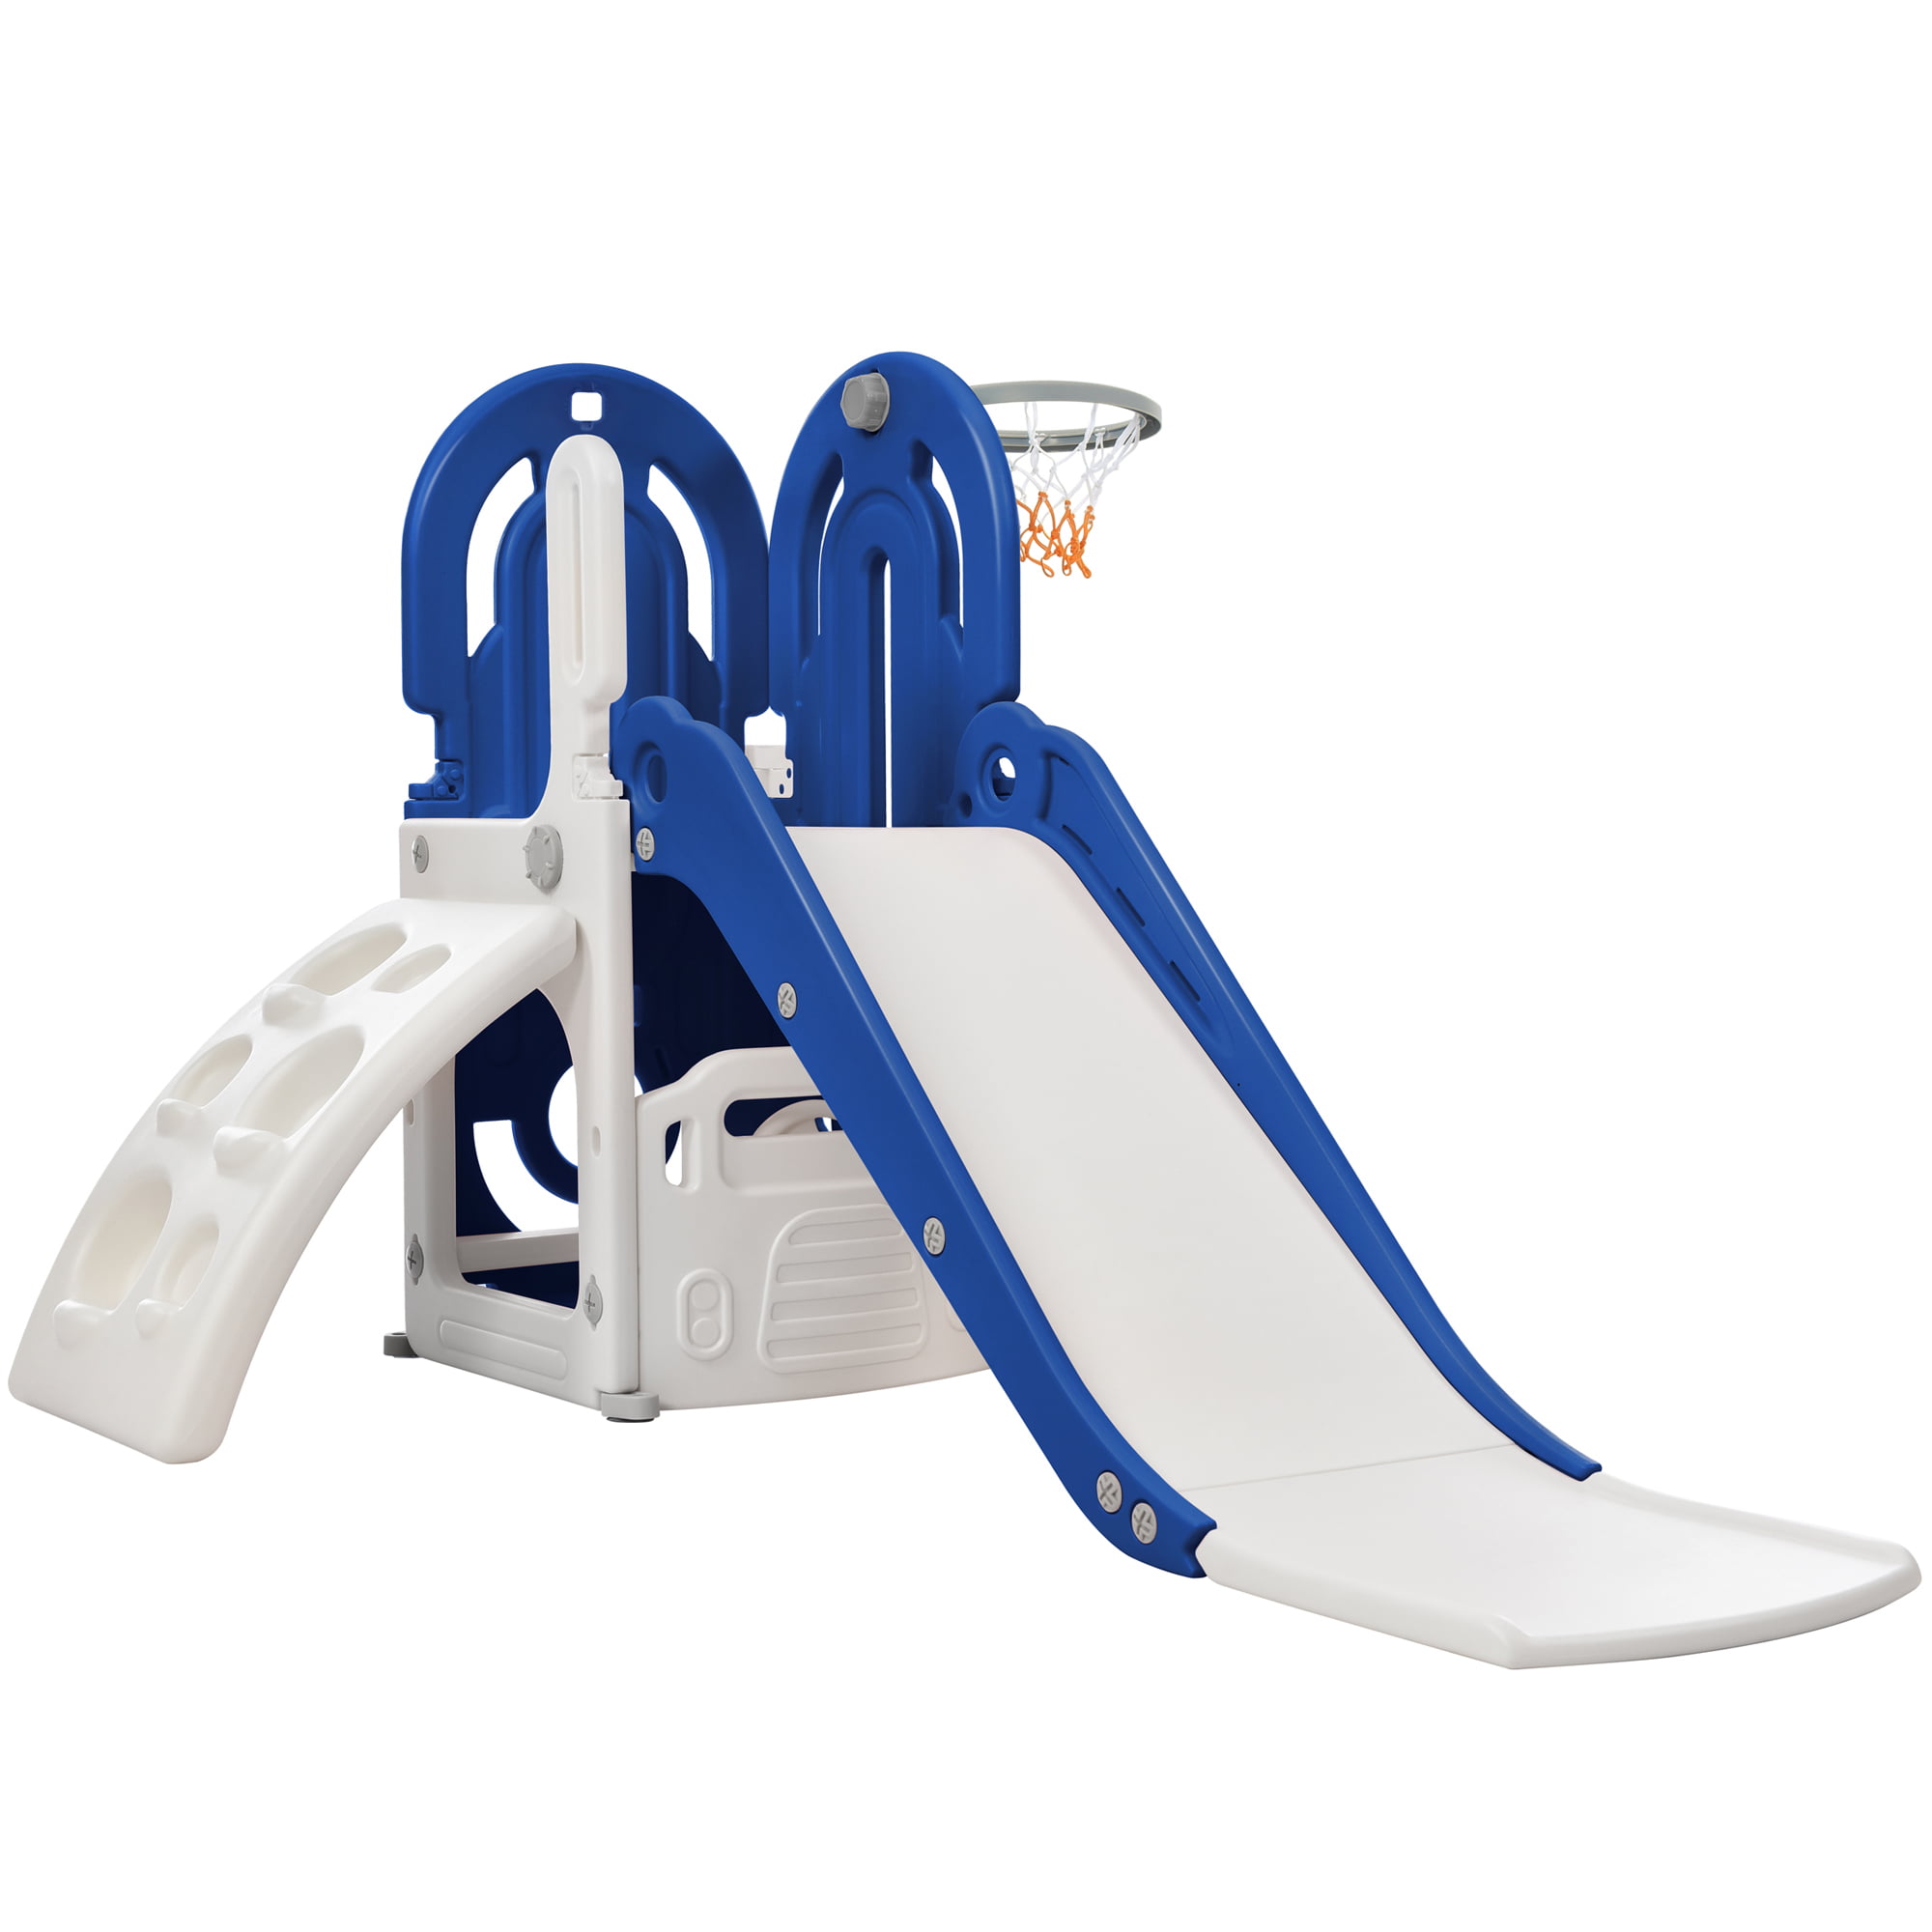 4 in 1 Climber And Slide Set